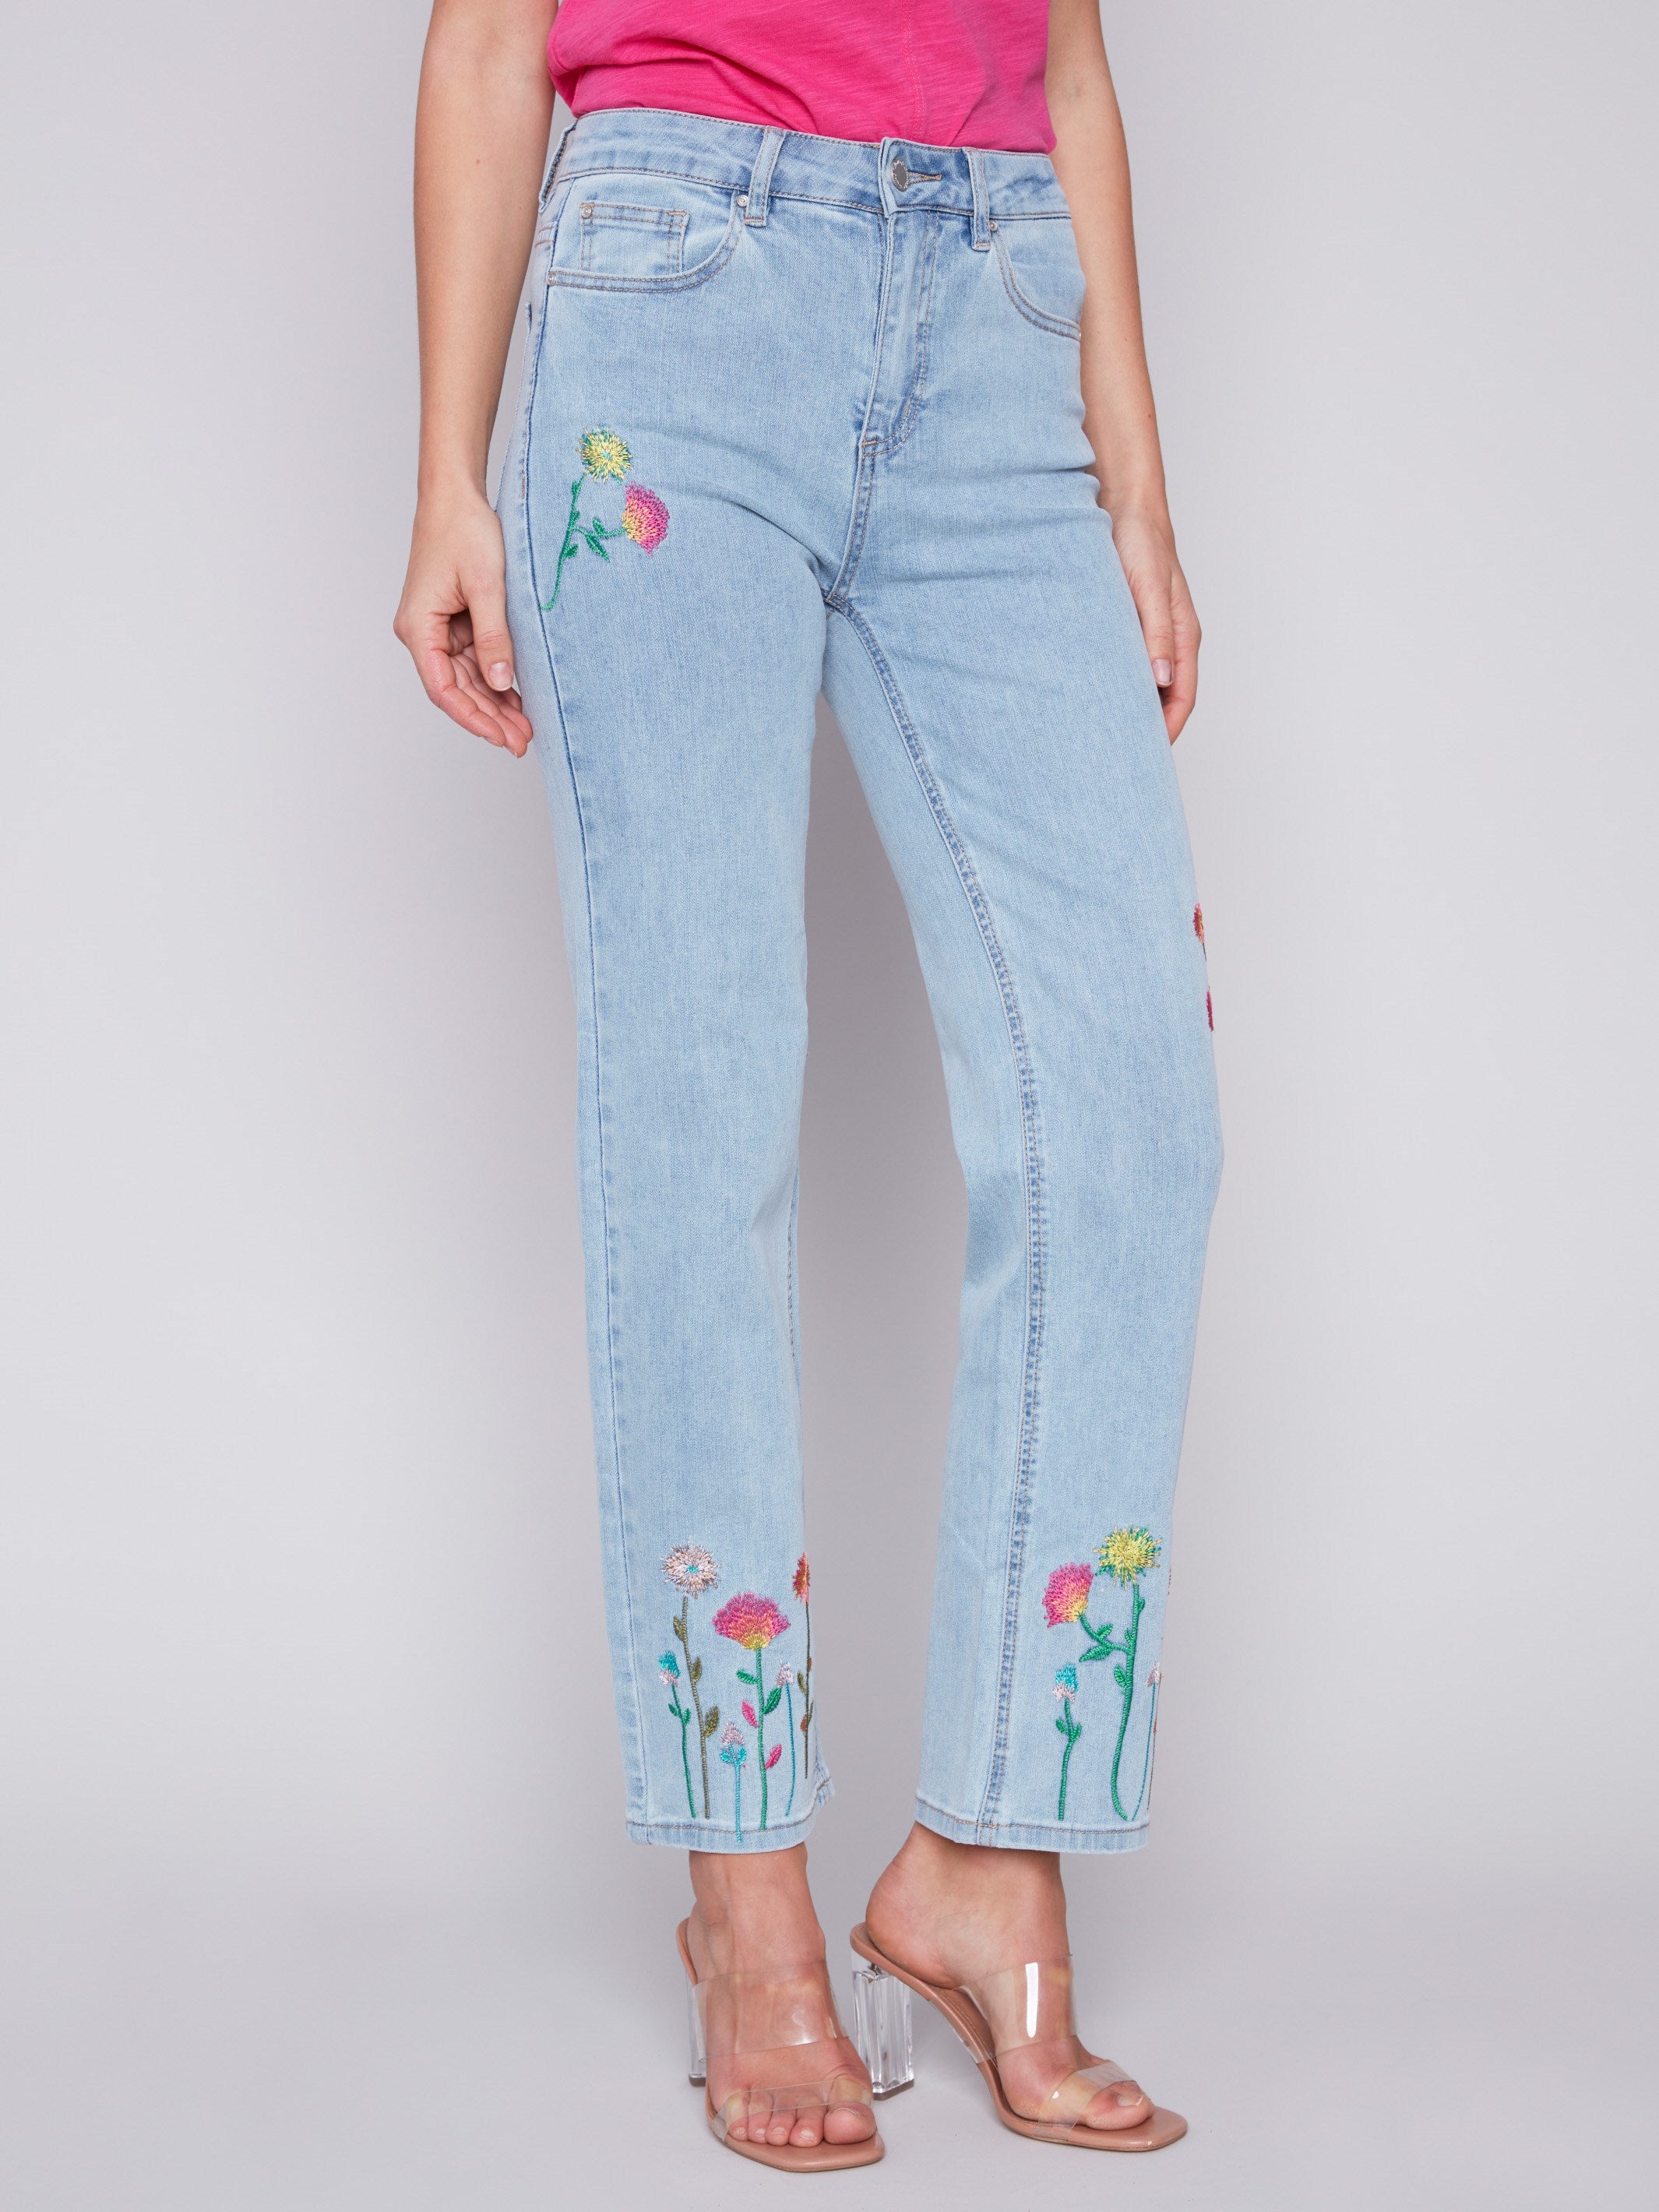 Charlie B Floral Embroidered Jeans - Bleach Blue - Image 8